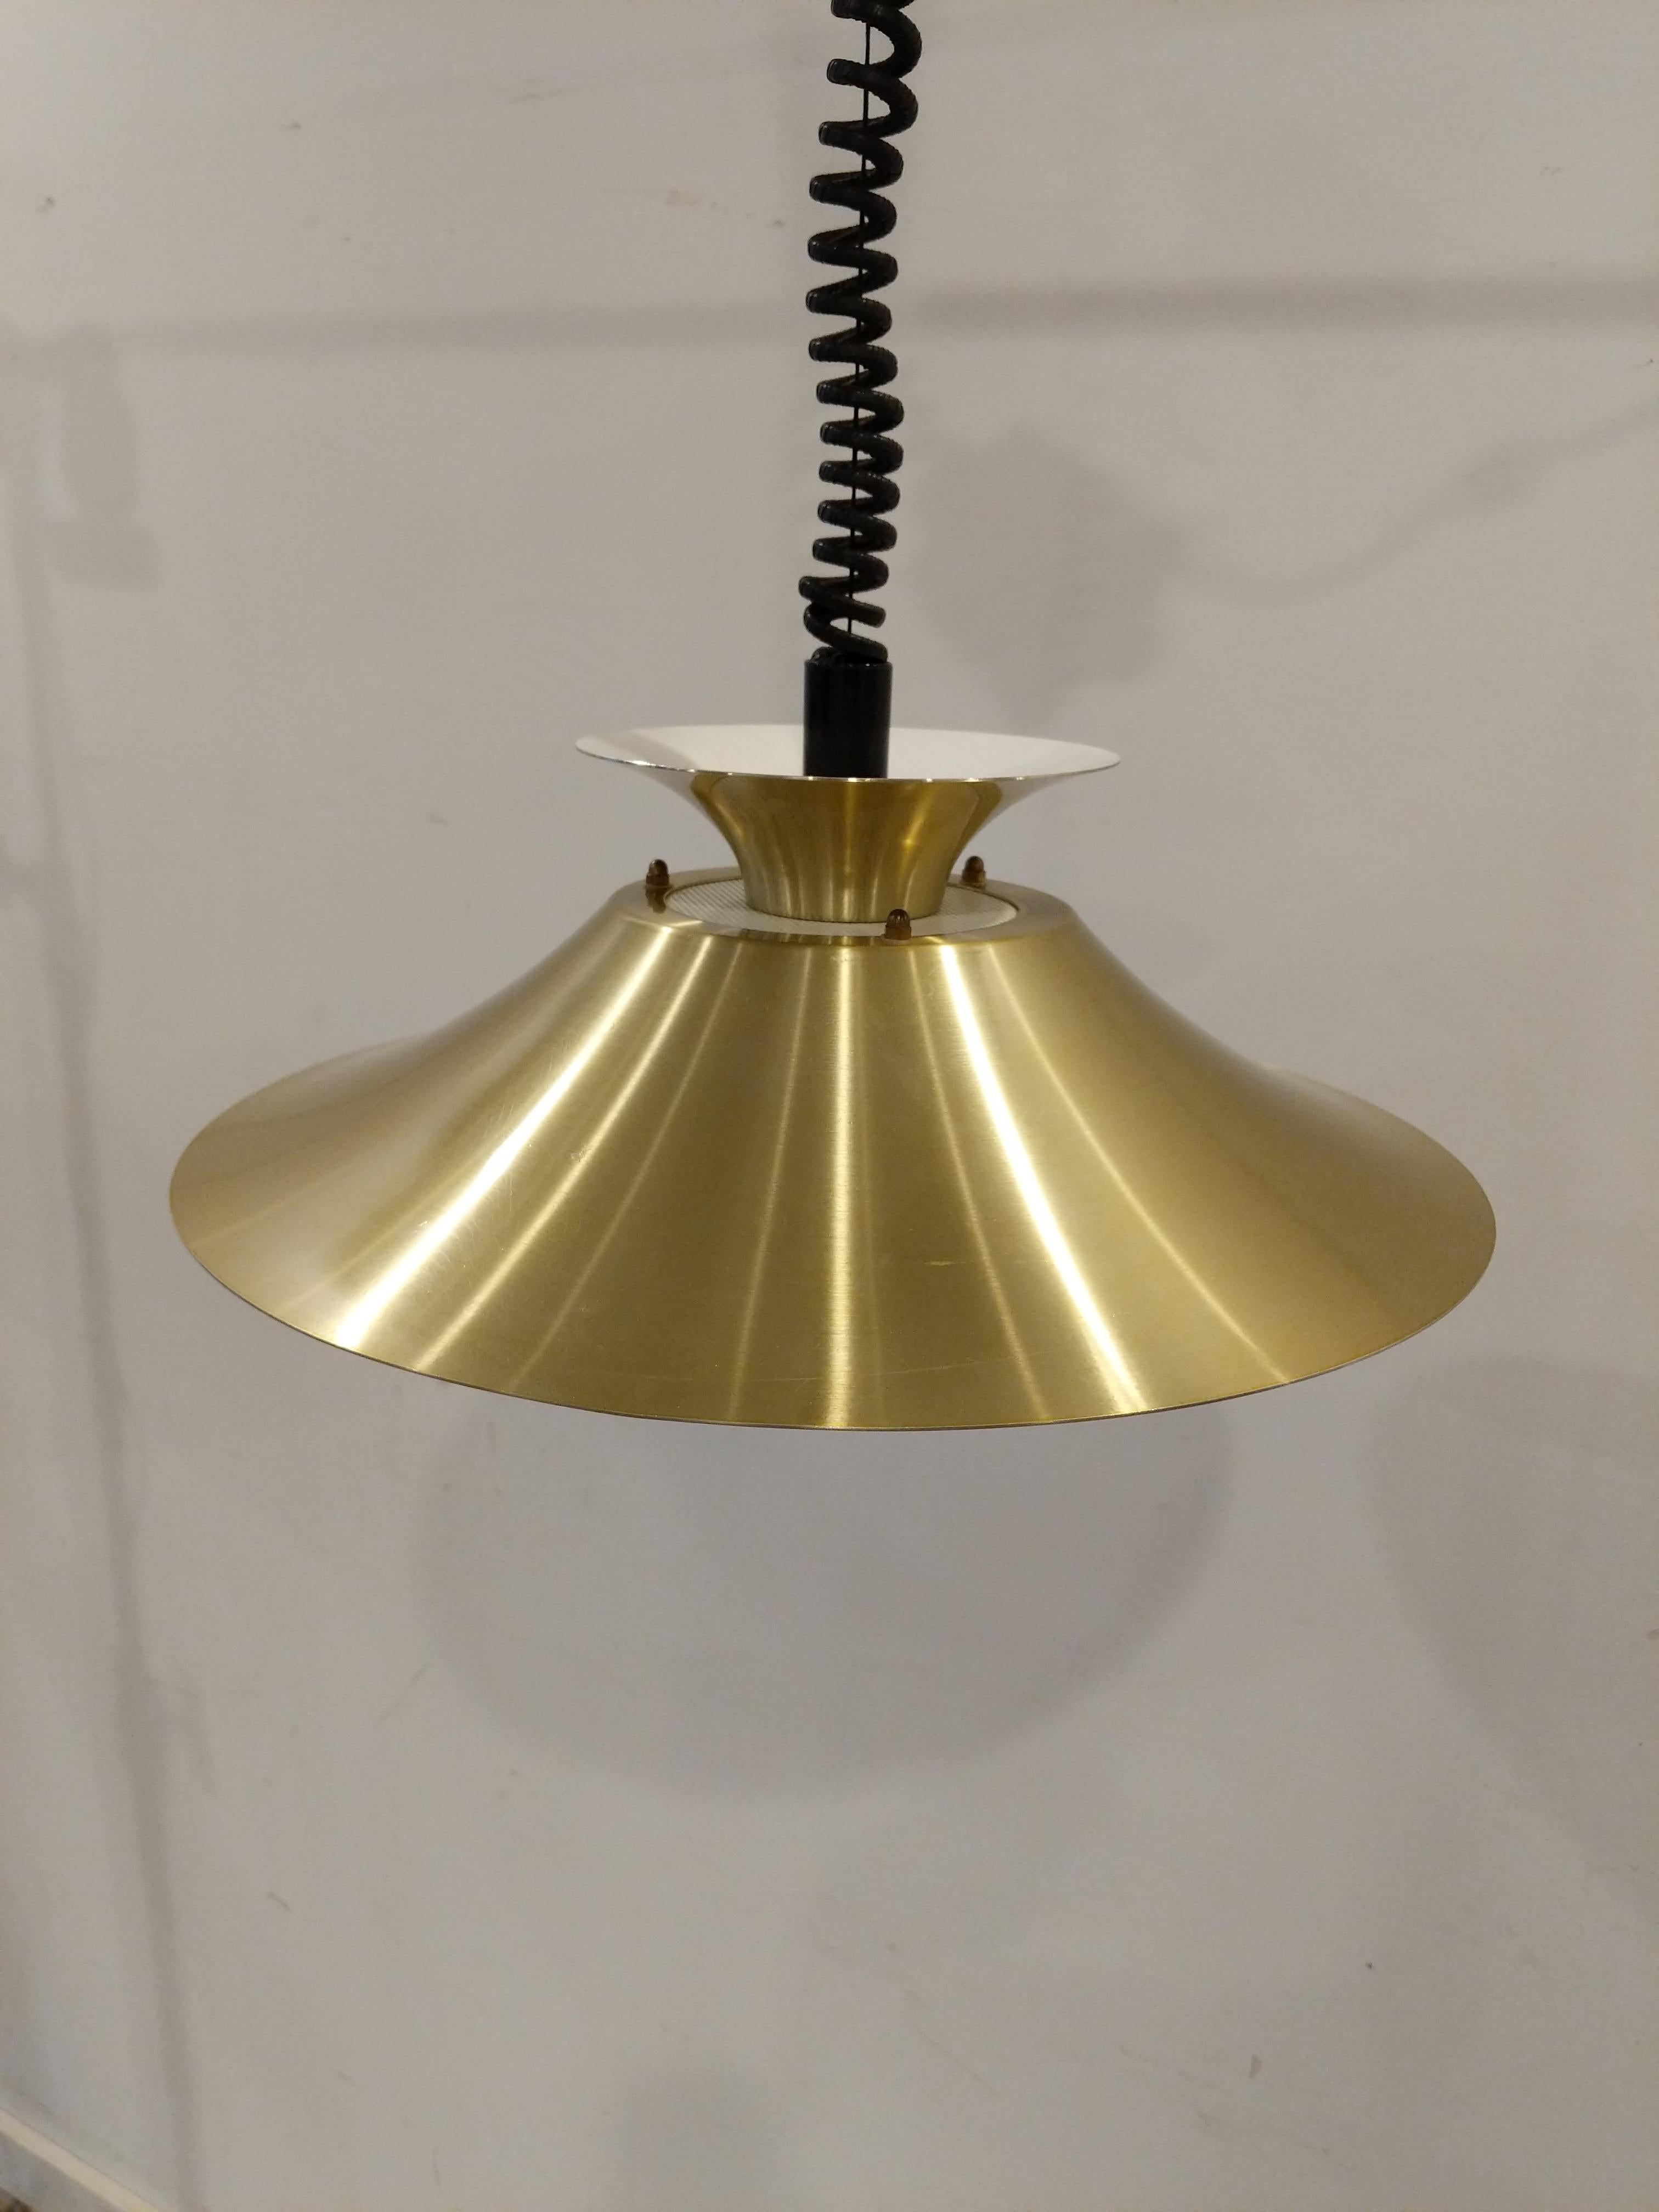 Authentic vintage mid century Danish / Scandinavian Modern hanging lamp / ceiling lamp / pendant light.

Imported directly from Denmark, this lamp is in great shape overall with minor wear from age (see photos).

The lamp is metal.

Dimensions:
16”